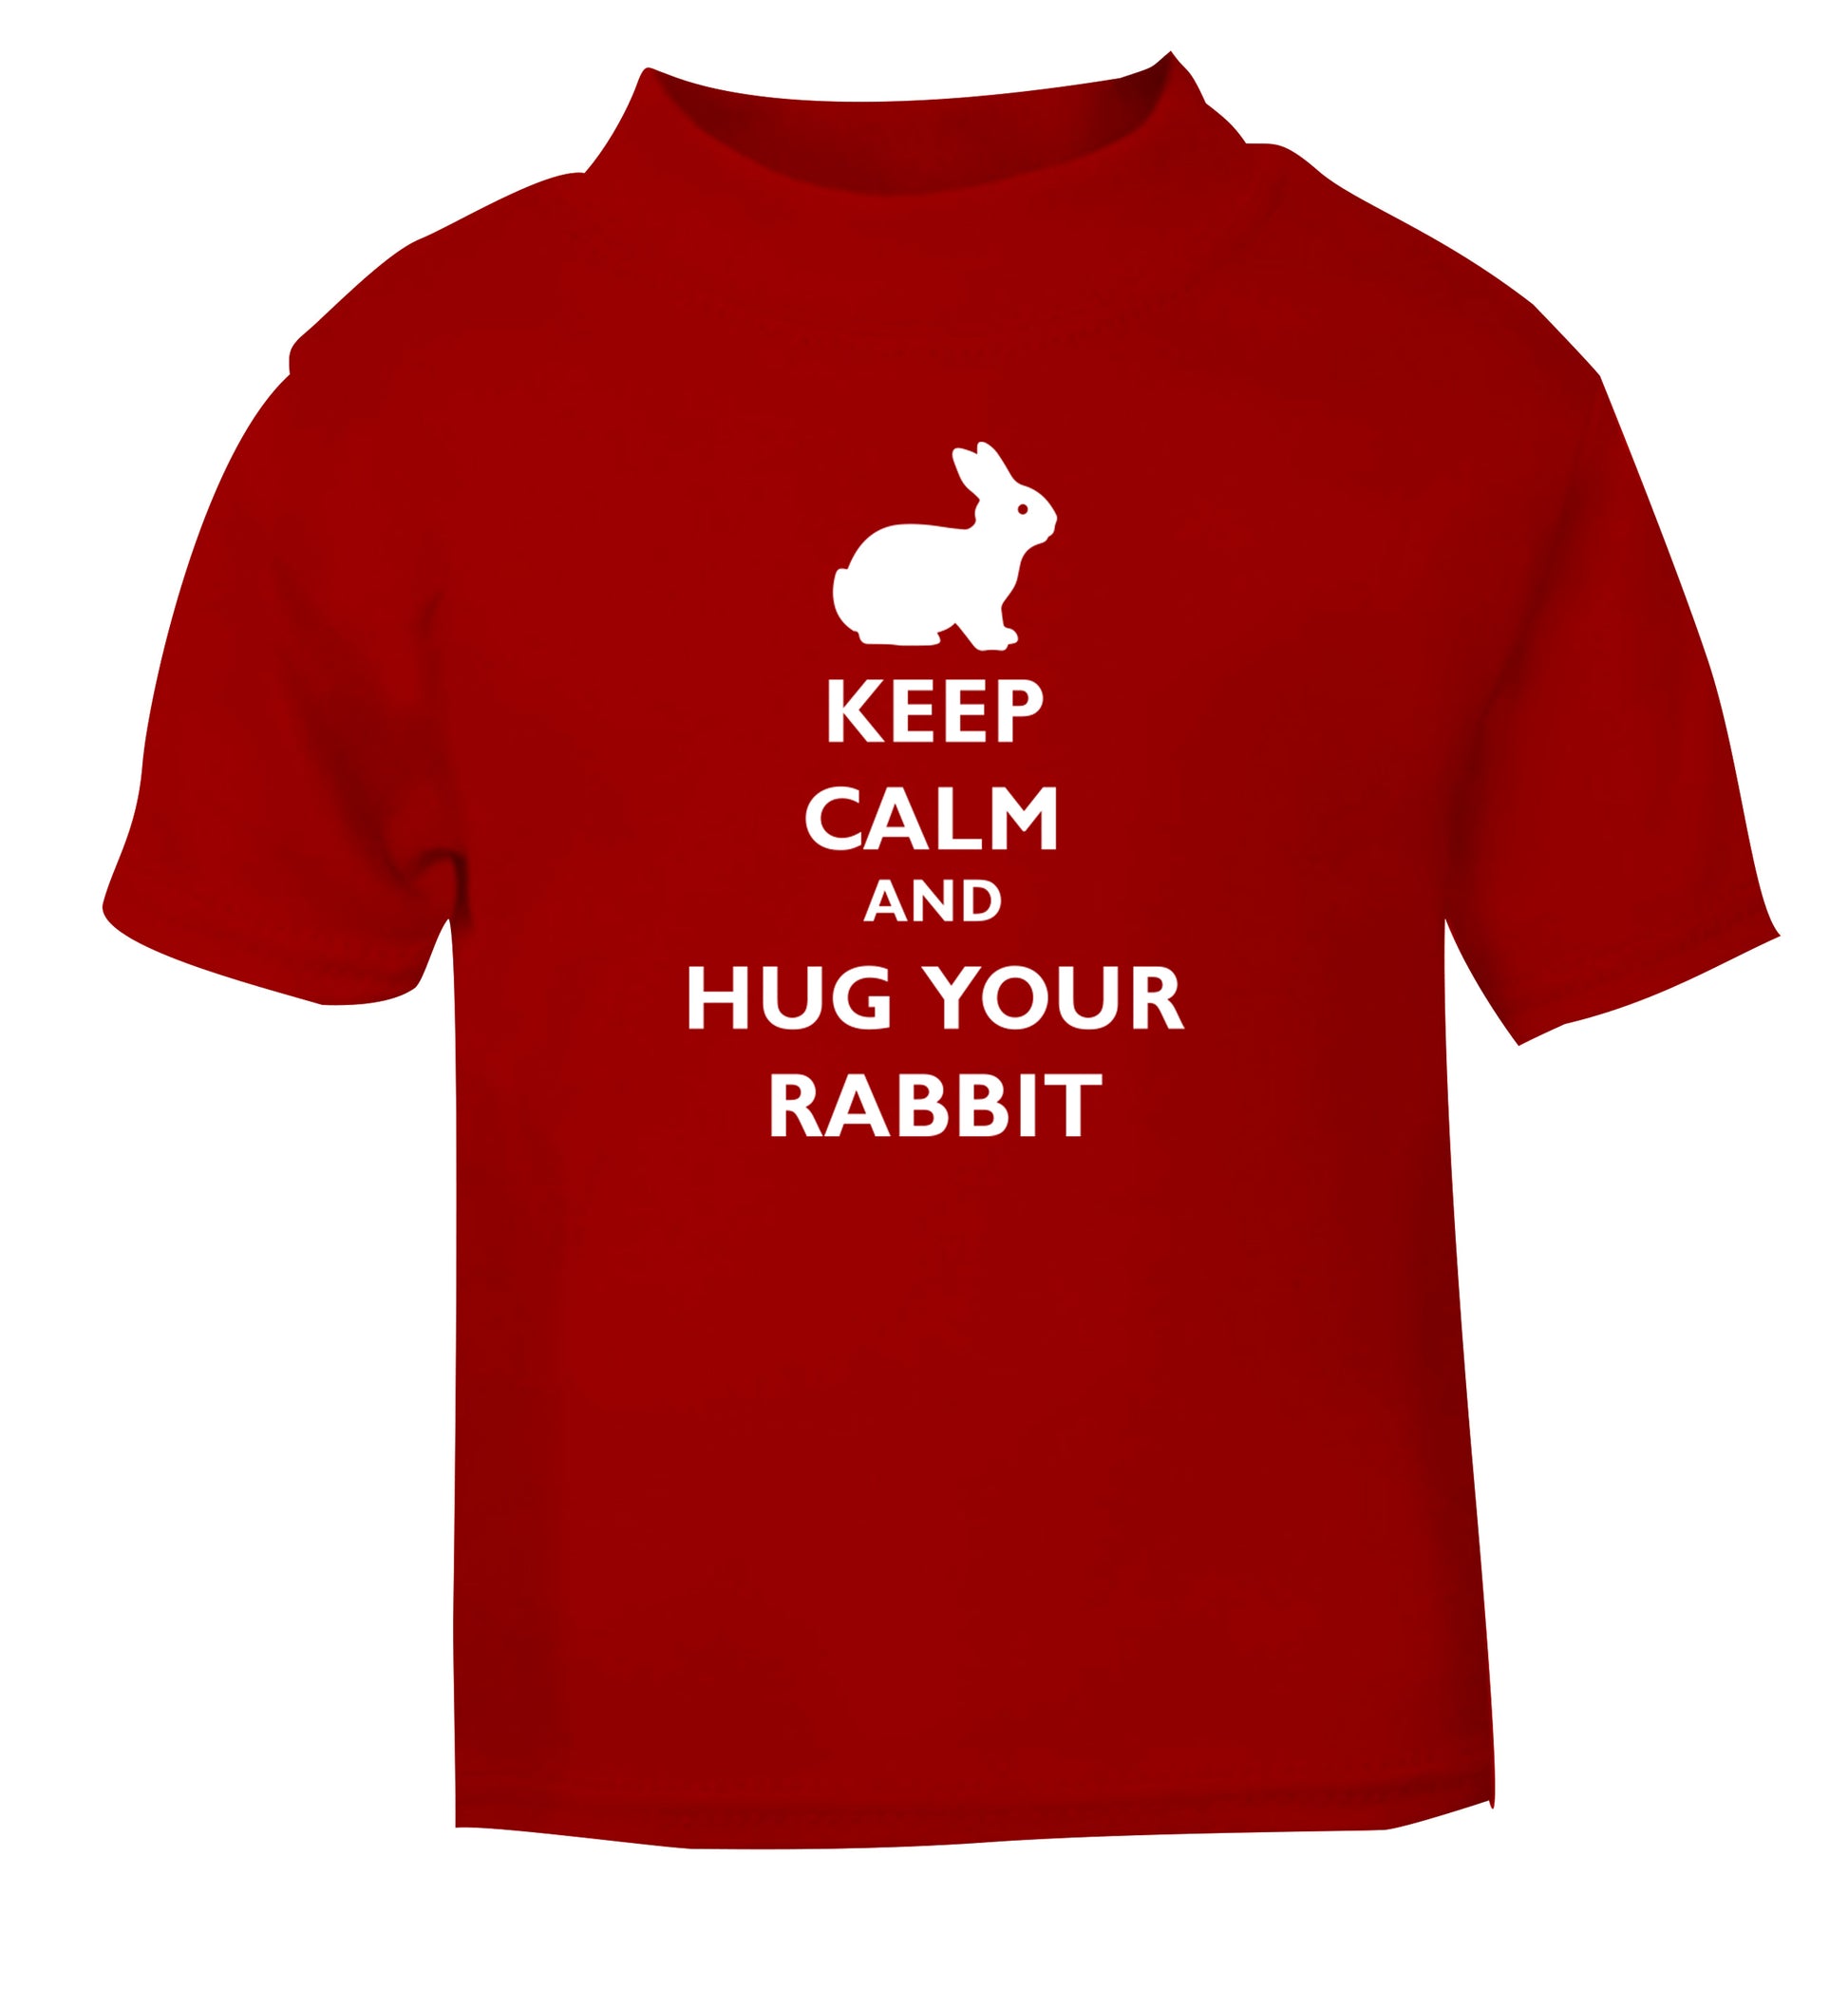 Keep calm and hug your rabbit red Baby Toddler Tshirt 2 Years